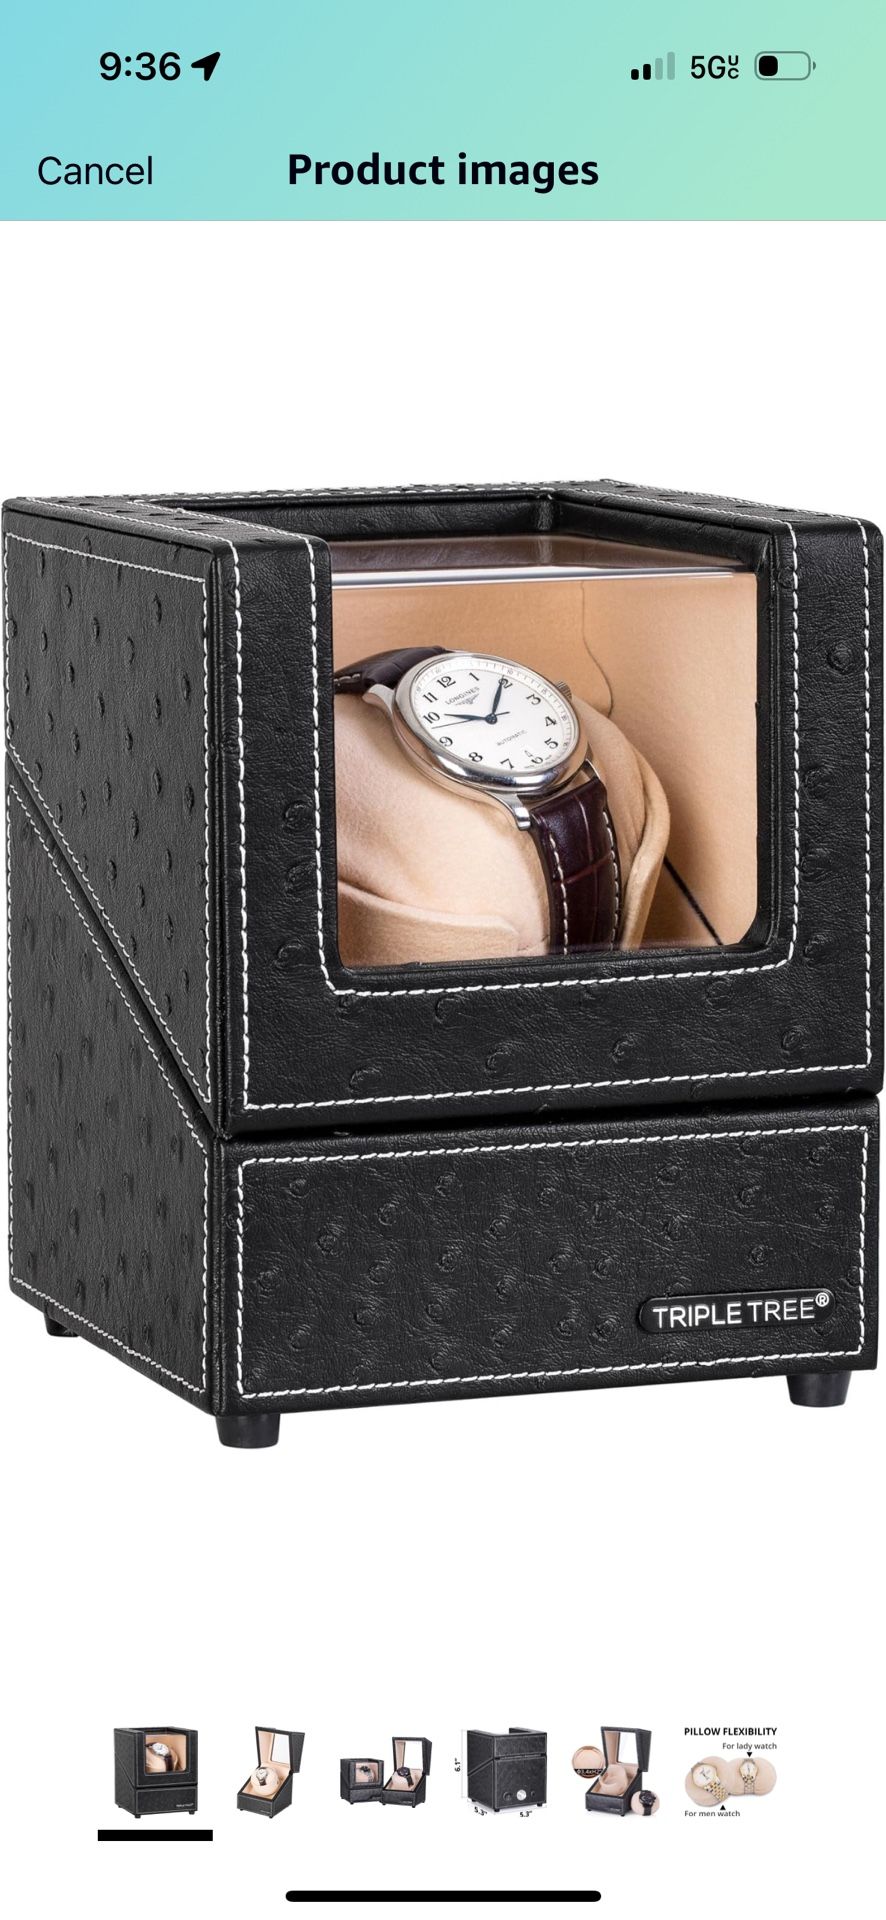 Single Watch Winder for Automatic Watches, with Super Quiet Japanese Motor, 4 Rotation Mode Setting, Flexible Plush Pillow Fit Lady and Man Watches